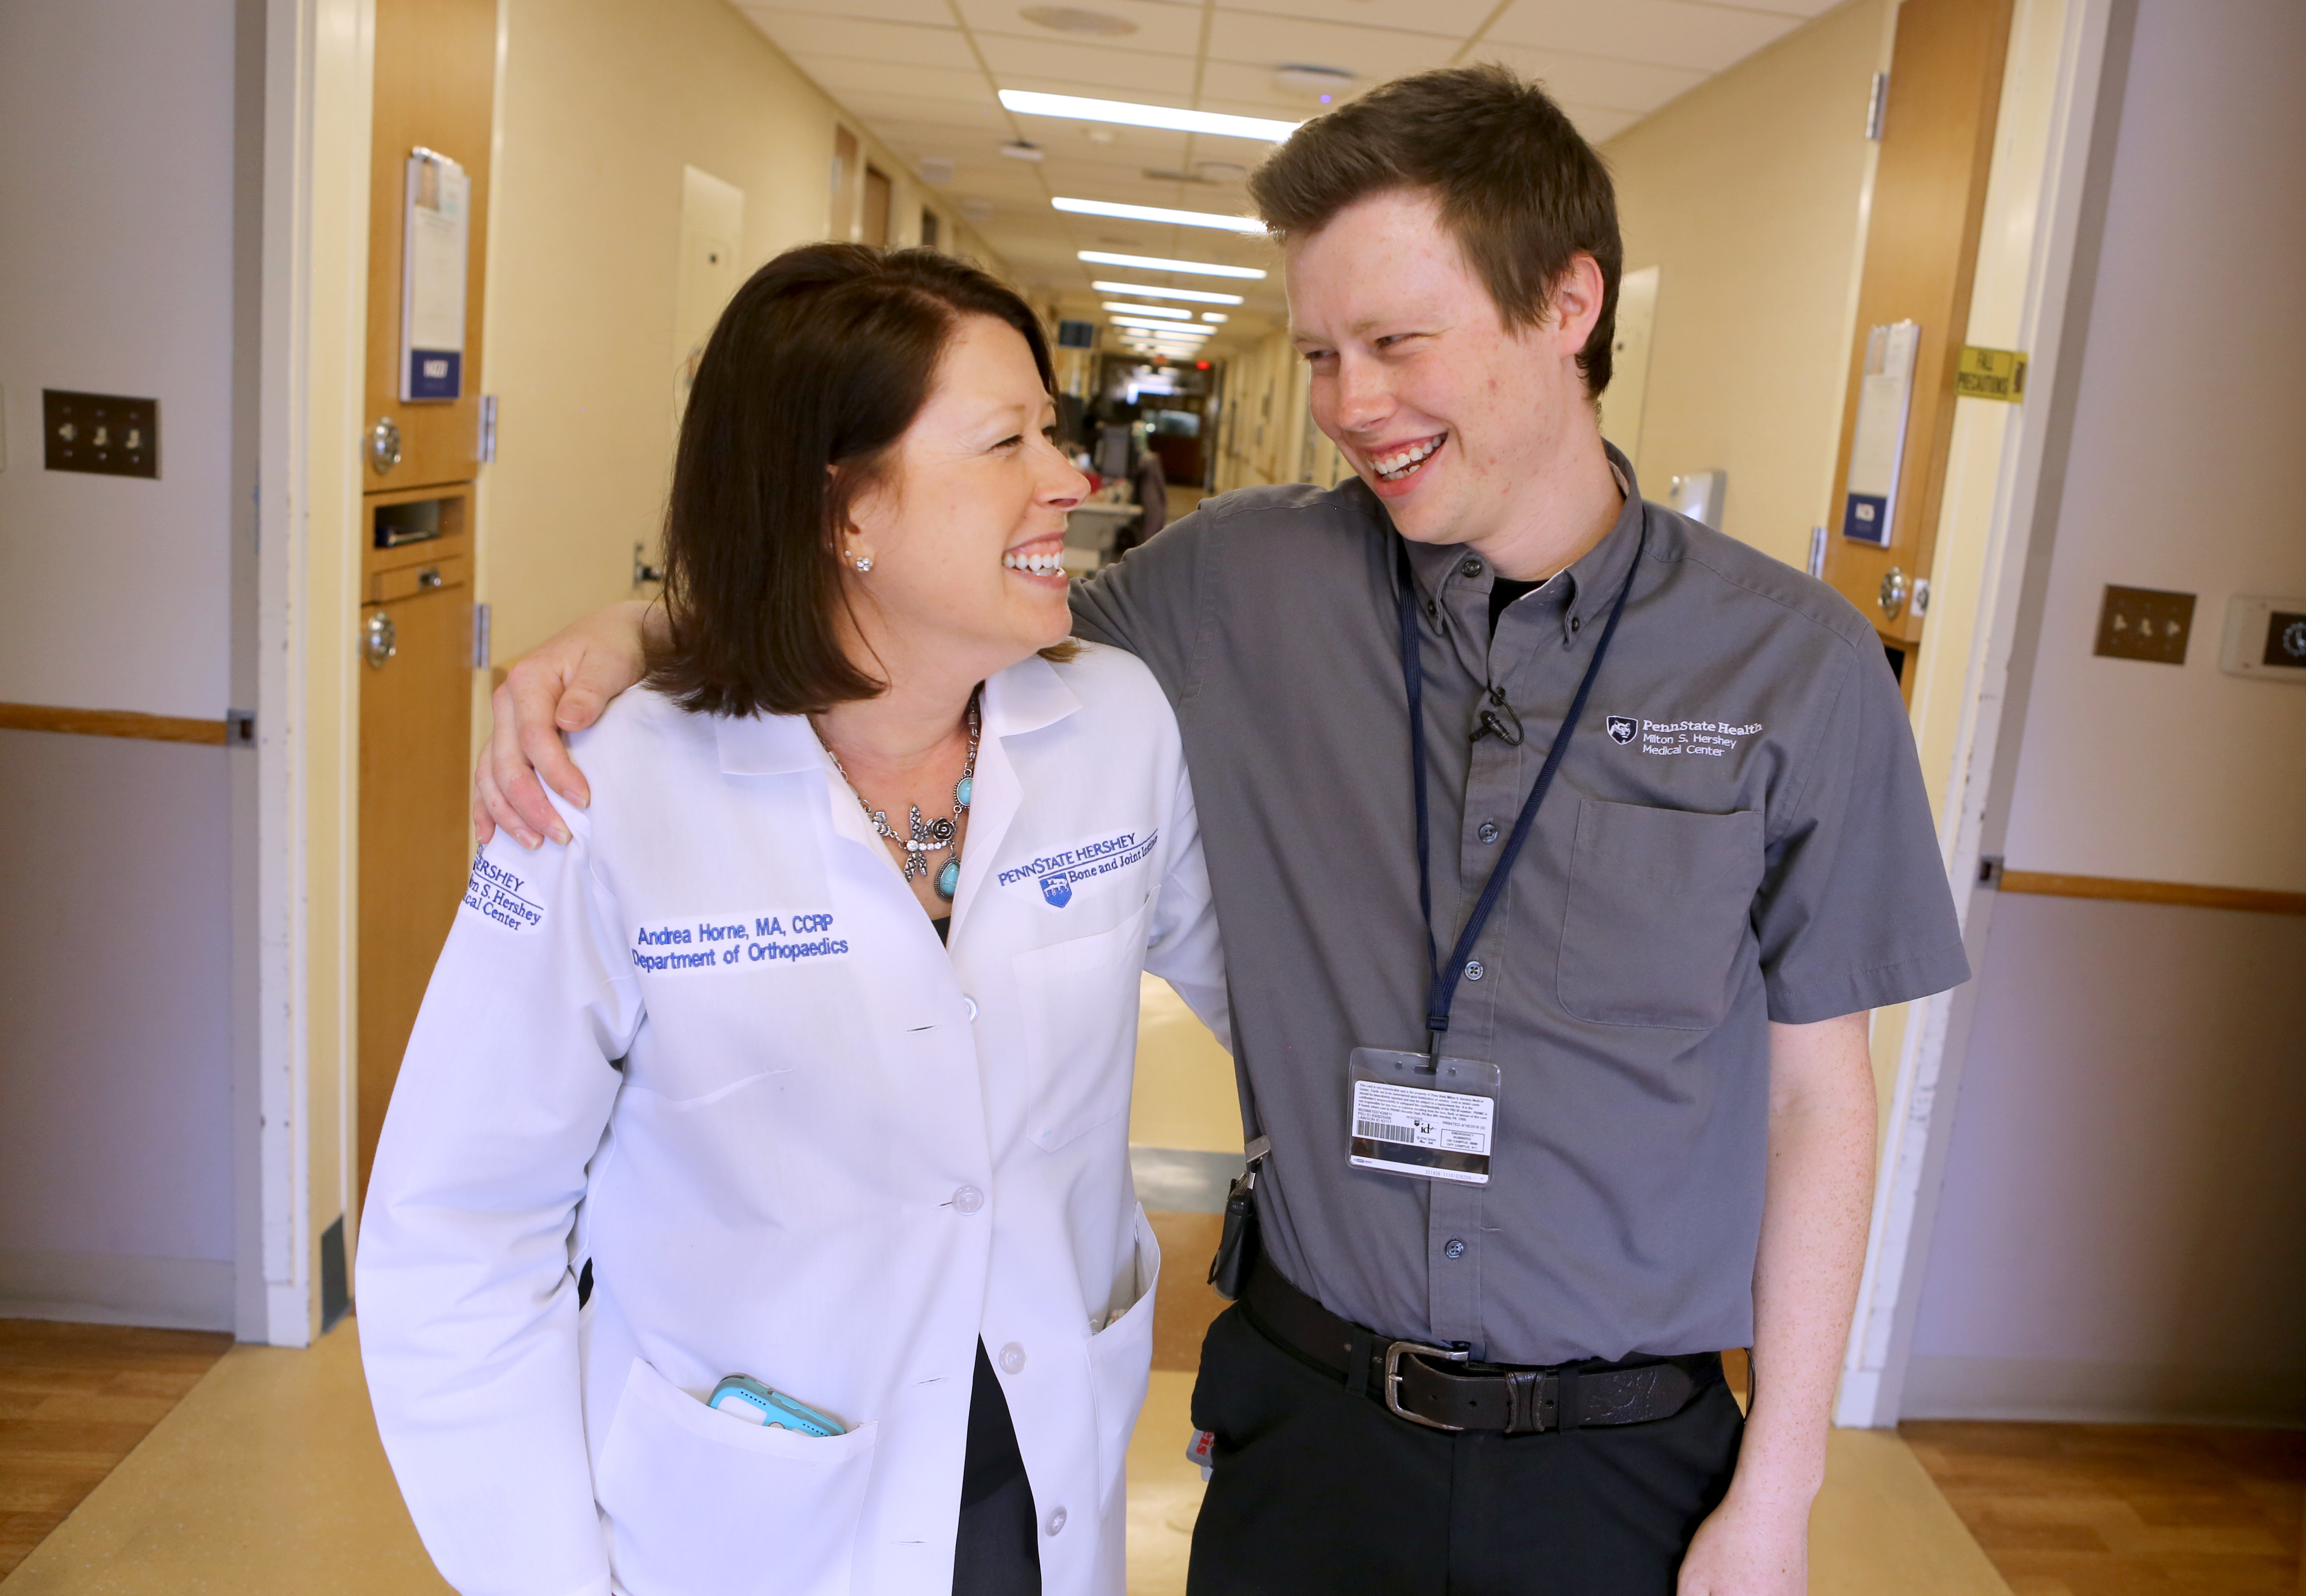 Andrea and Cole Horne stand in a hallway at Hershey Medical Center with their arms around each other and smiling broadly. Andrea is wearing a white lab coat with a Department of Orthopedics logo. Cole is wearing a button-down shirt with a Hershey Medical Center logo.